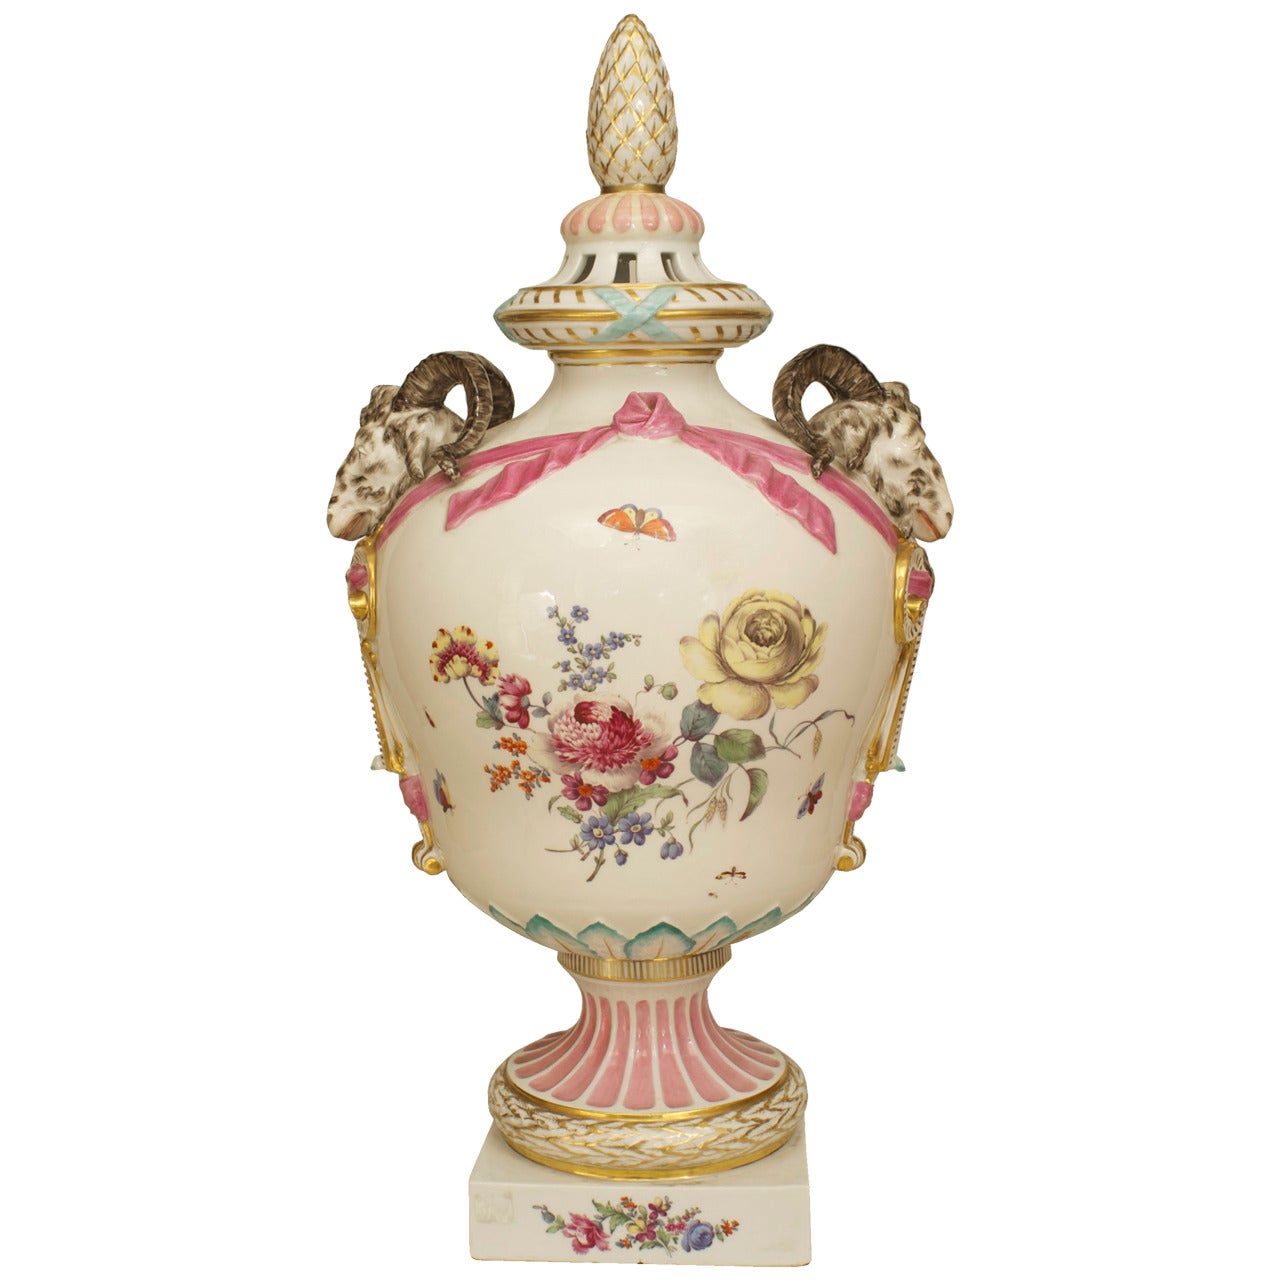 A Fine 18th Century Continental German Porcelain Decorated Urn